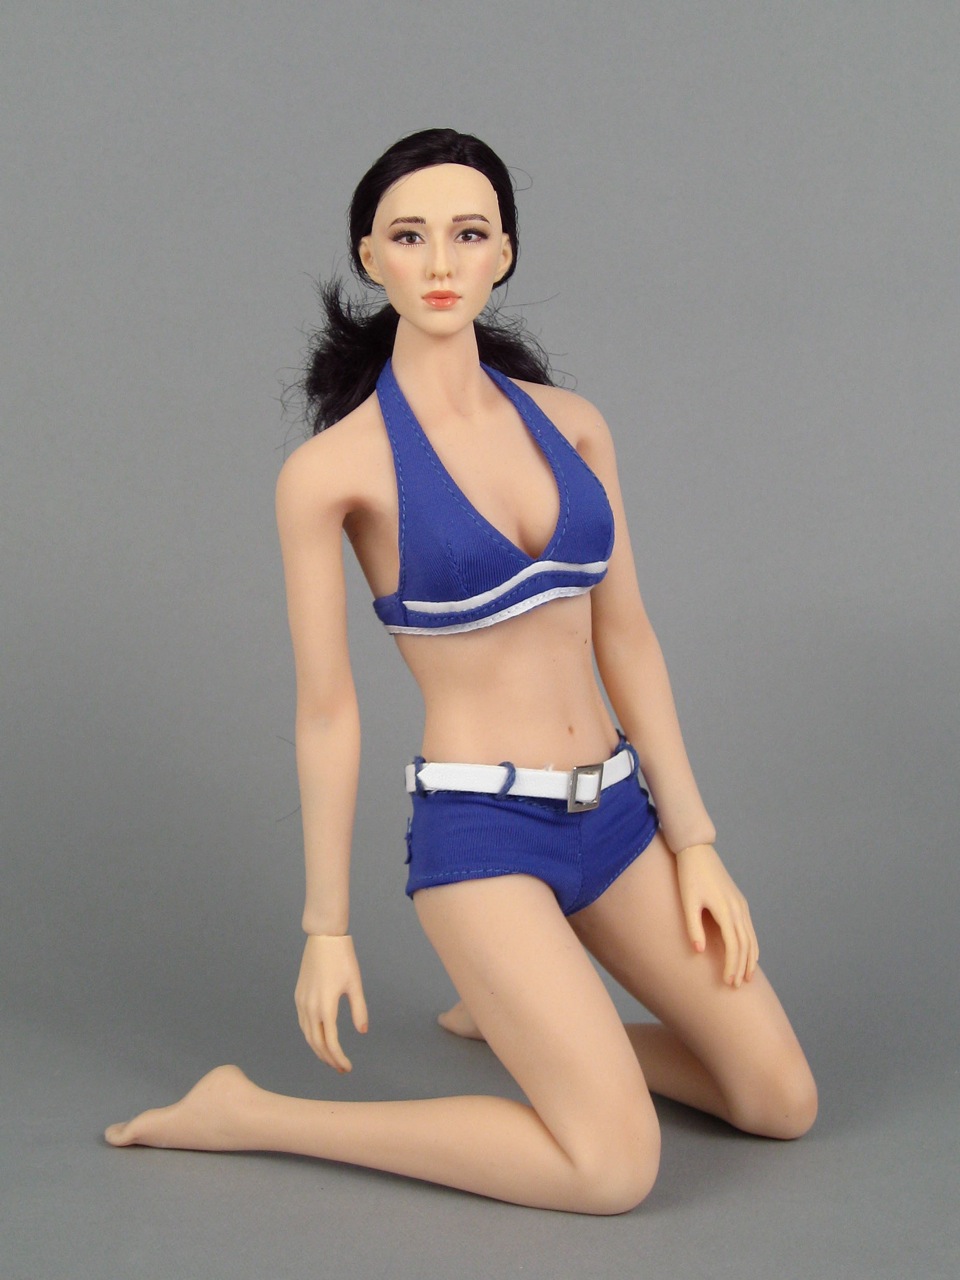 Phicen's Super Flexible Seamless 1:6 Scale Figure with a Stainless